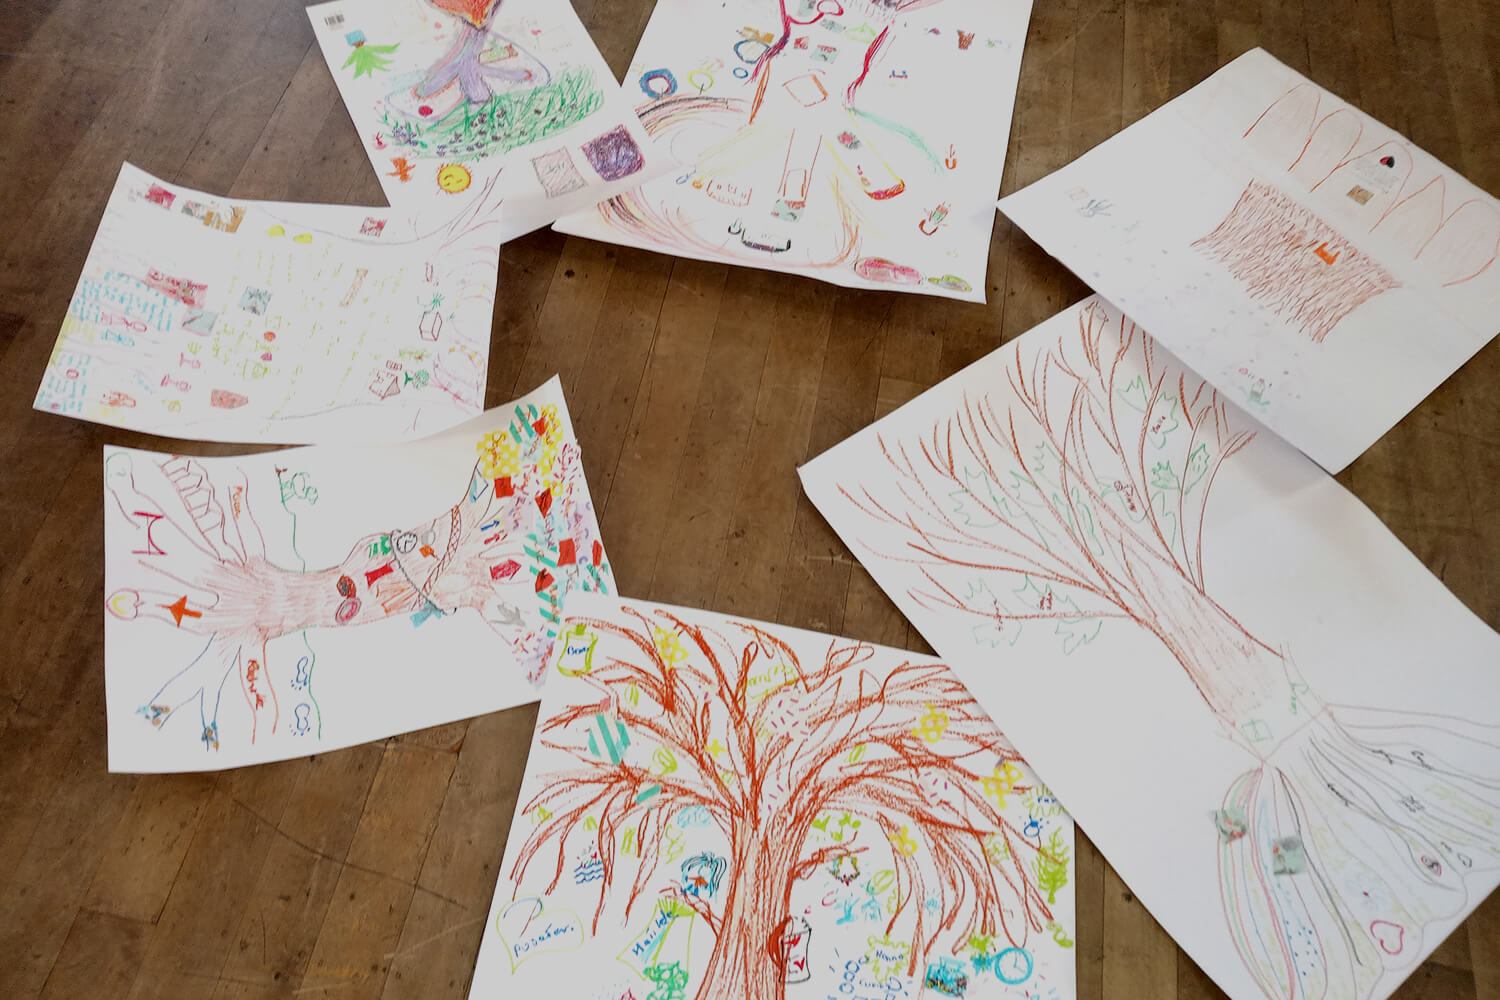 A selection of drawings showing the tree of life laid out on the floor